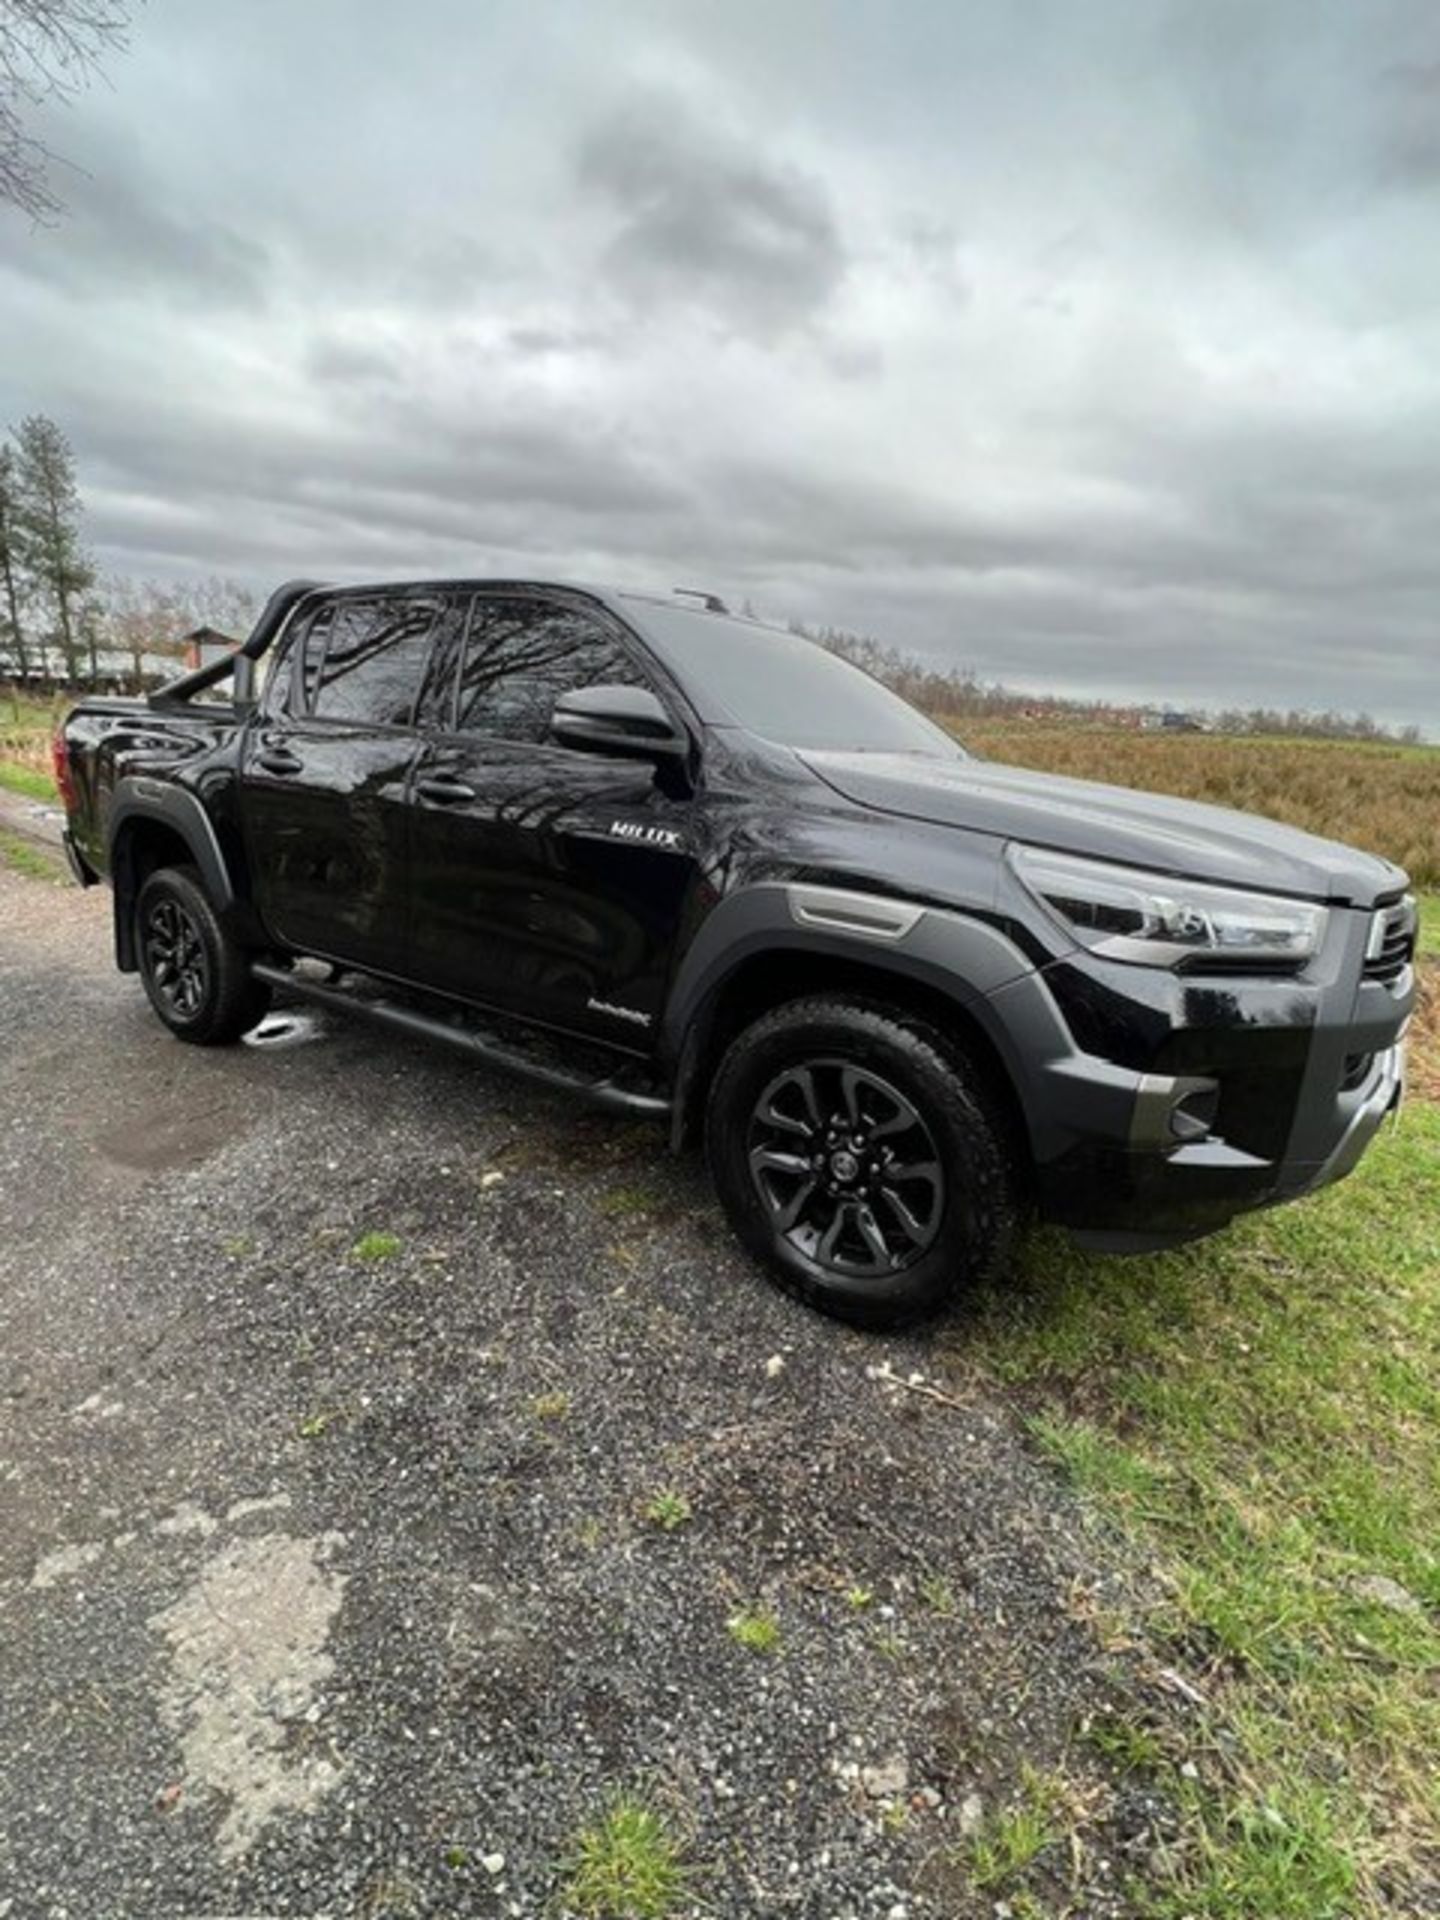 TOYOTA HILUX INVINCIBLE - Image 13 of 13